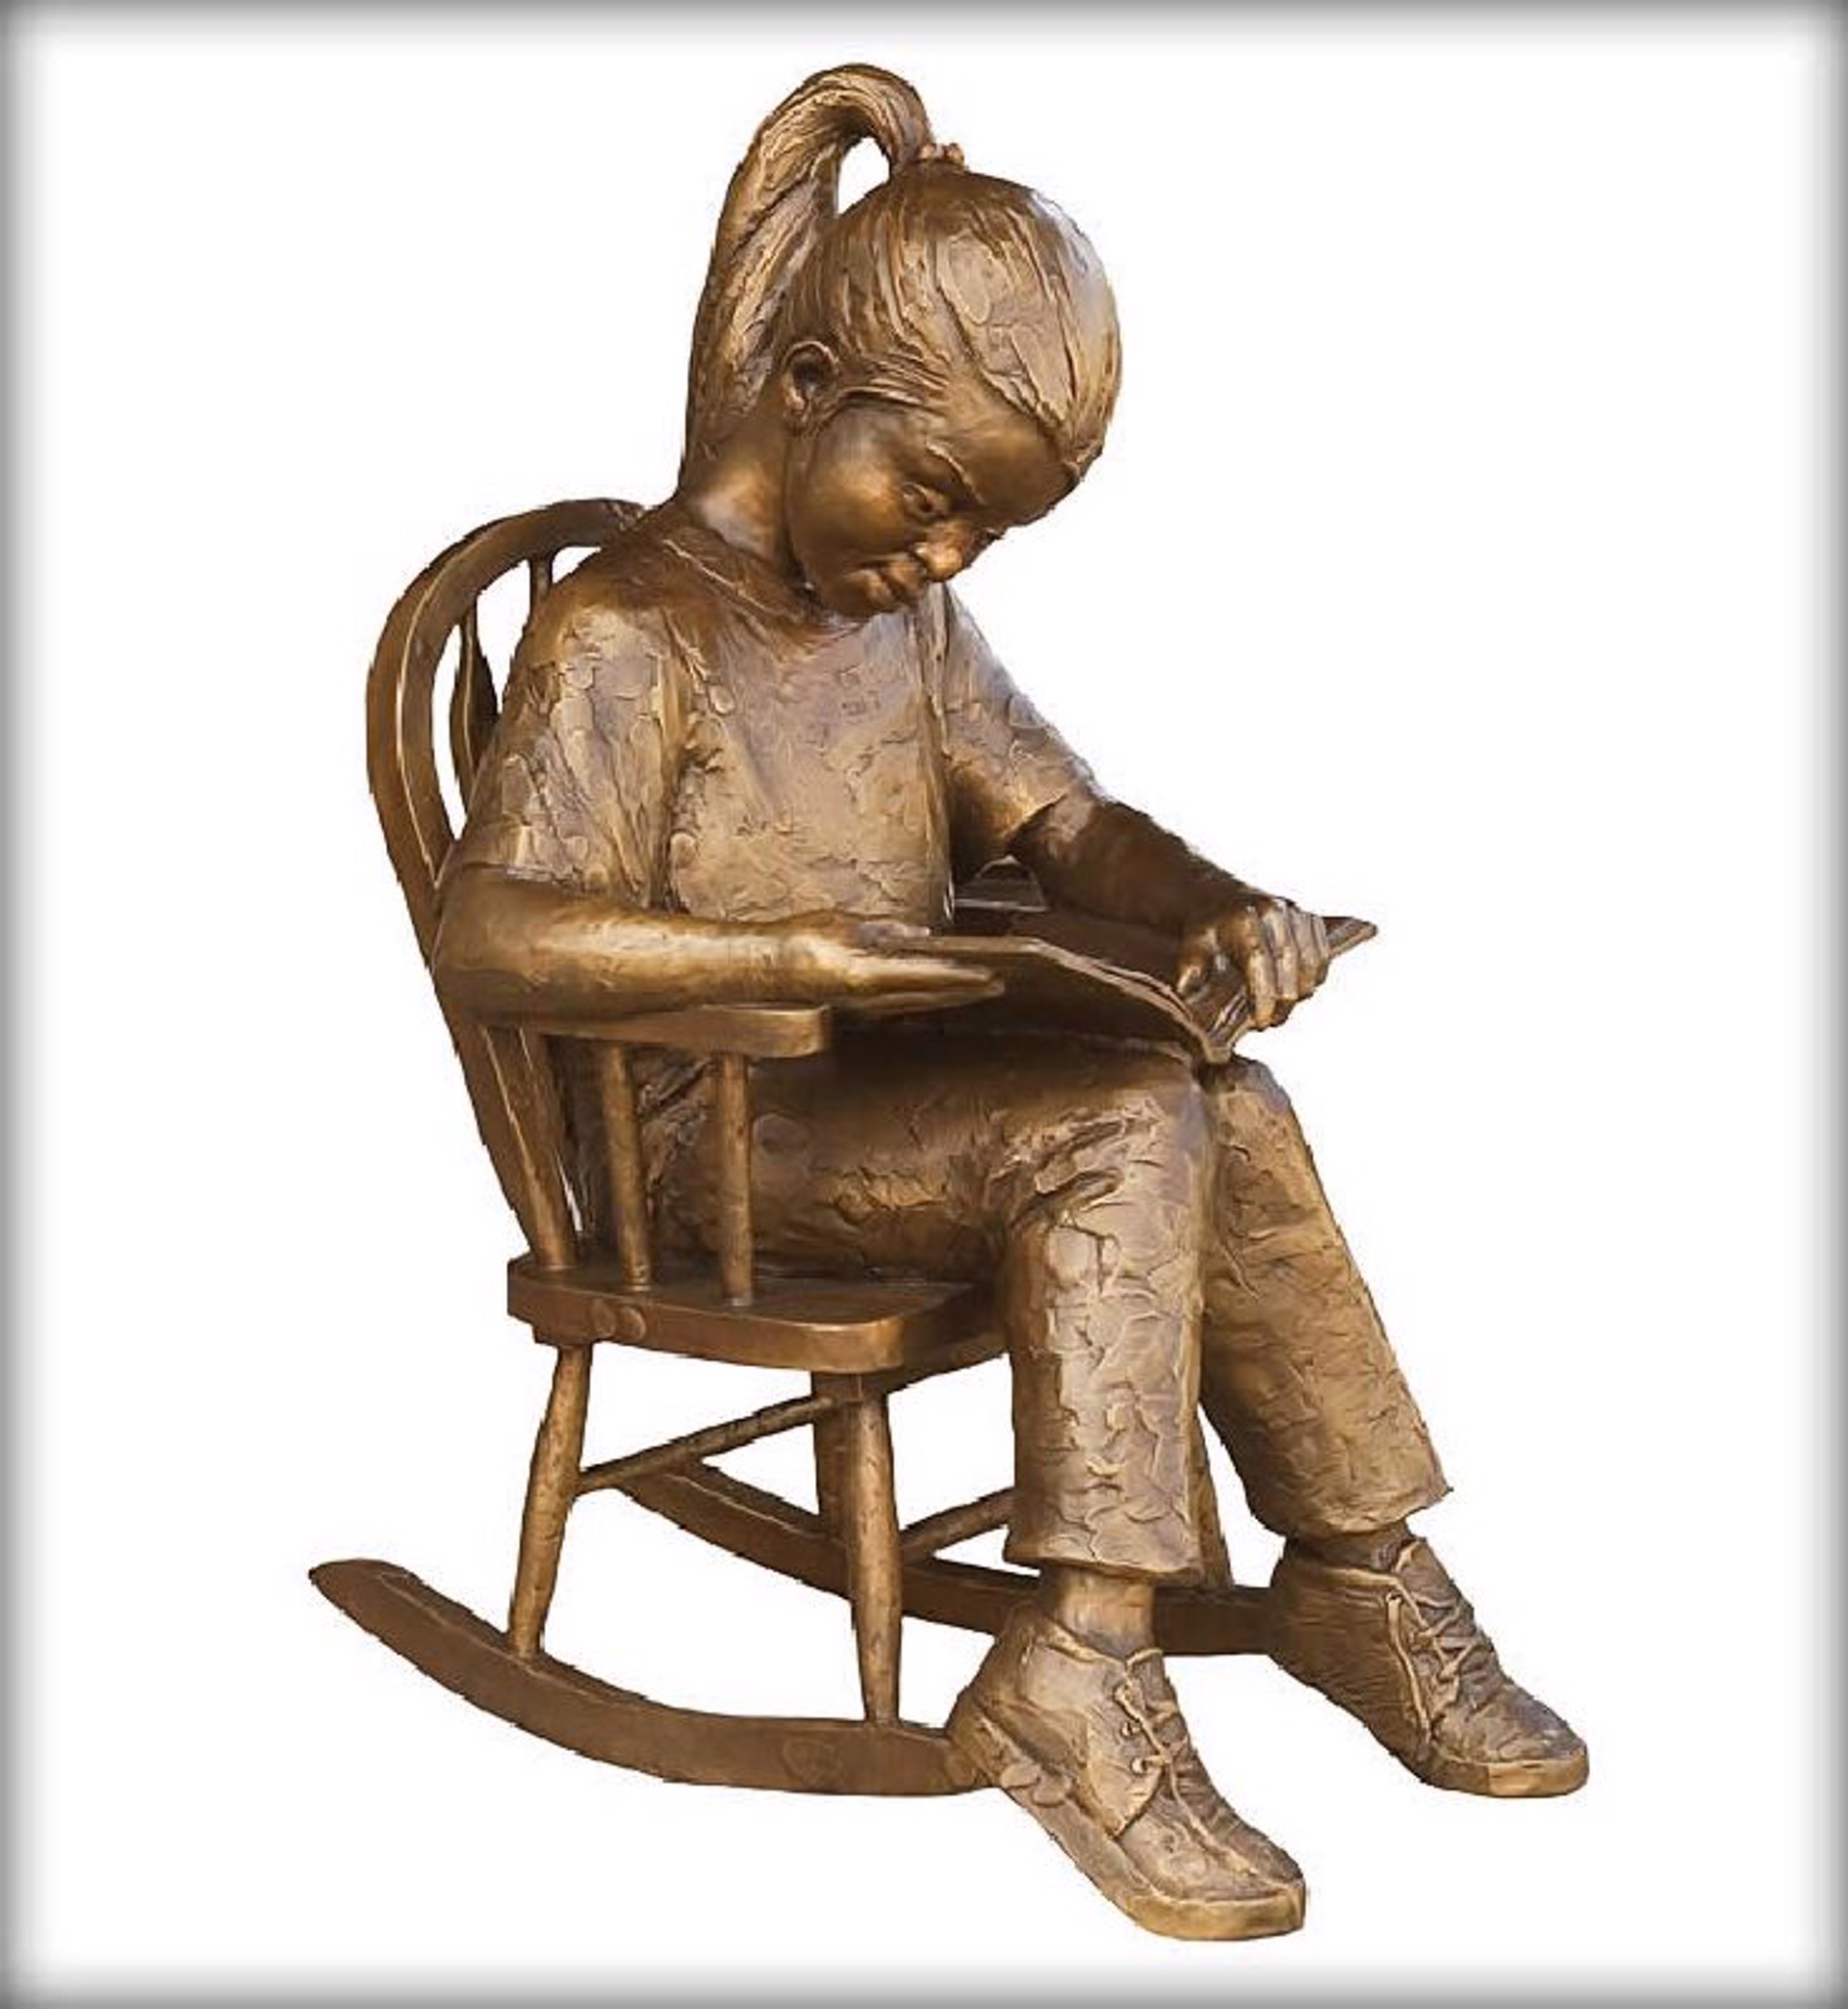 Timeout Girl (Small) #85 by Gary Lee Price (sculptor)